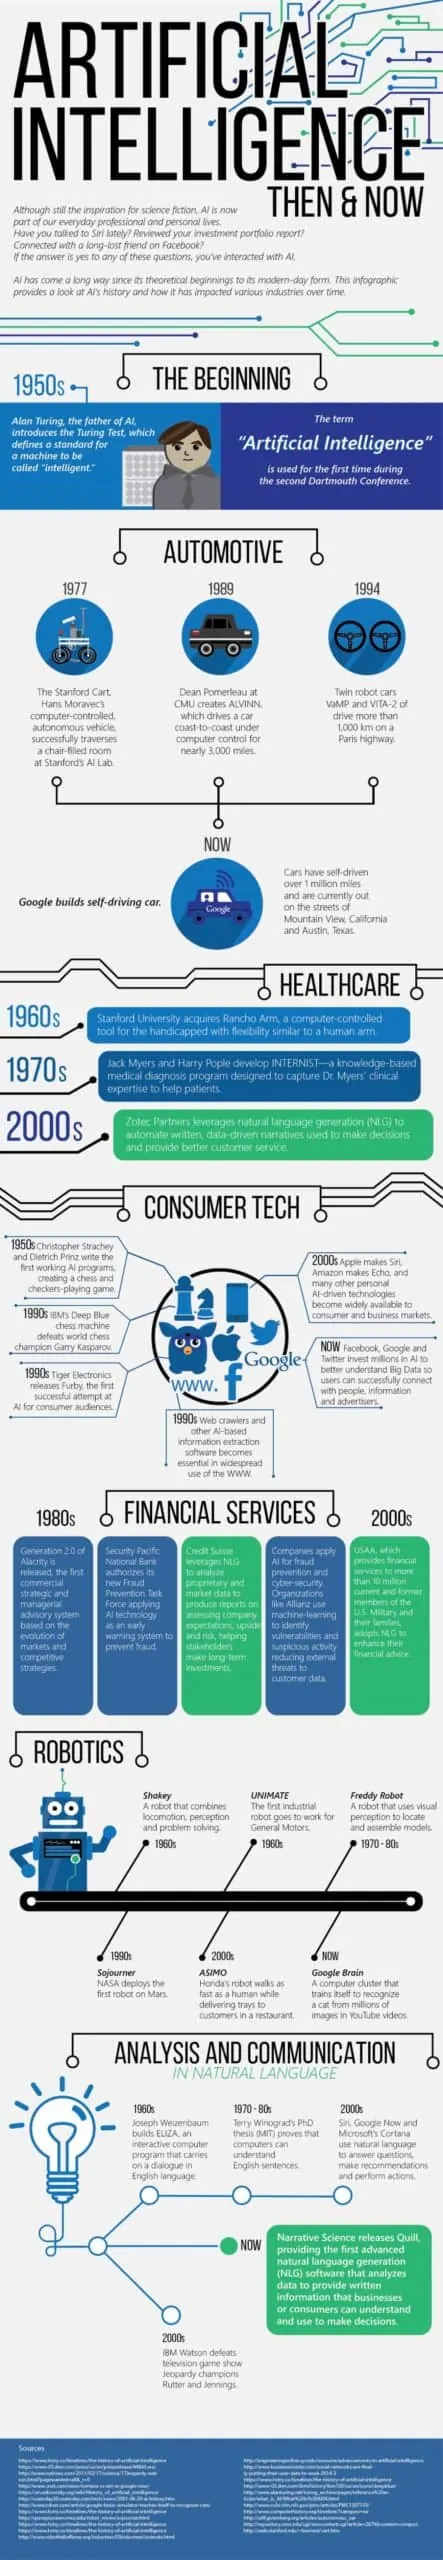 Artifical Intelligence Then & Now infographic